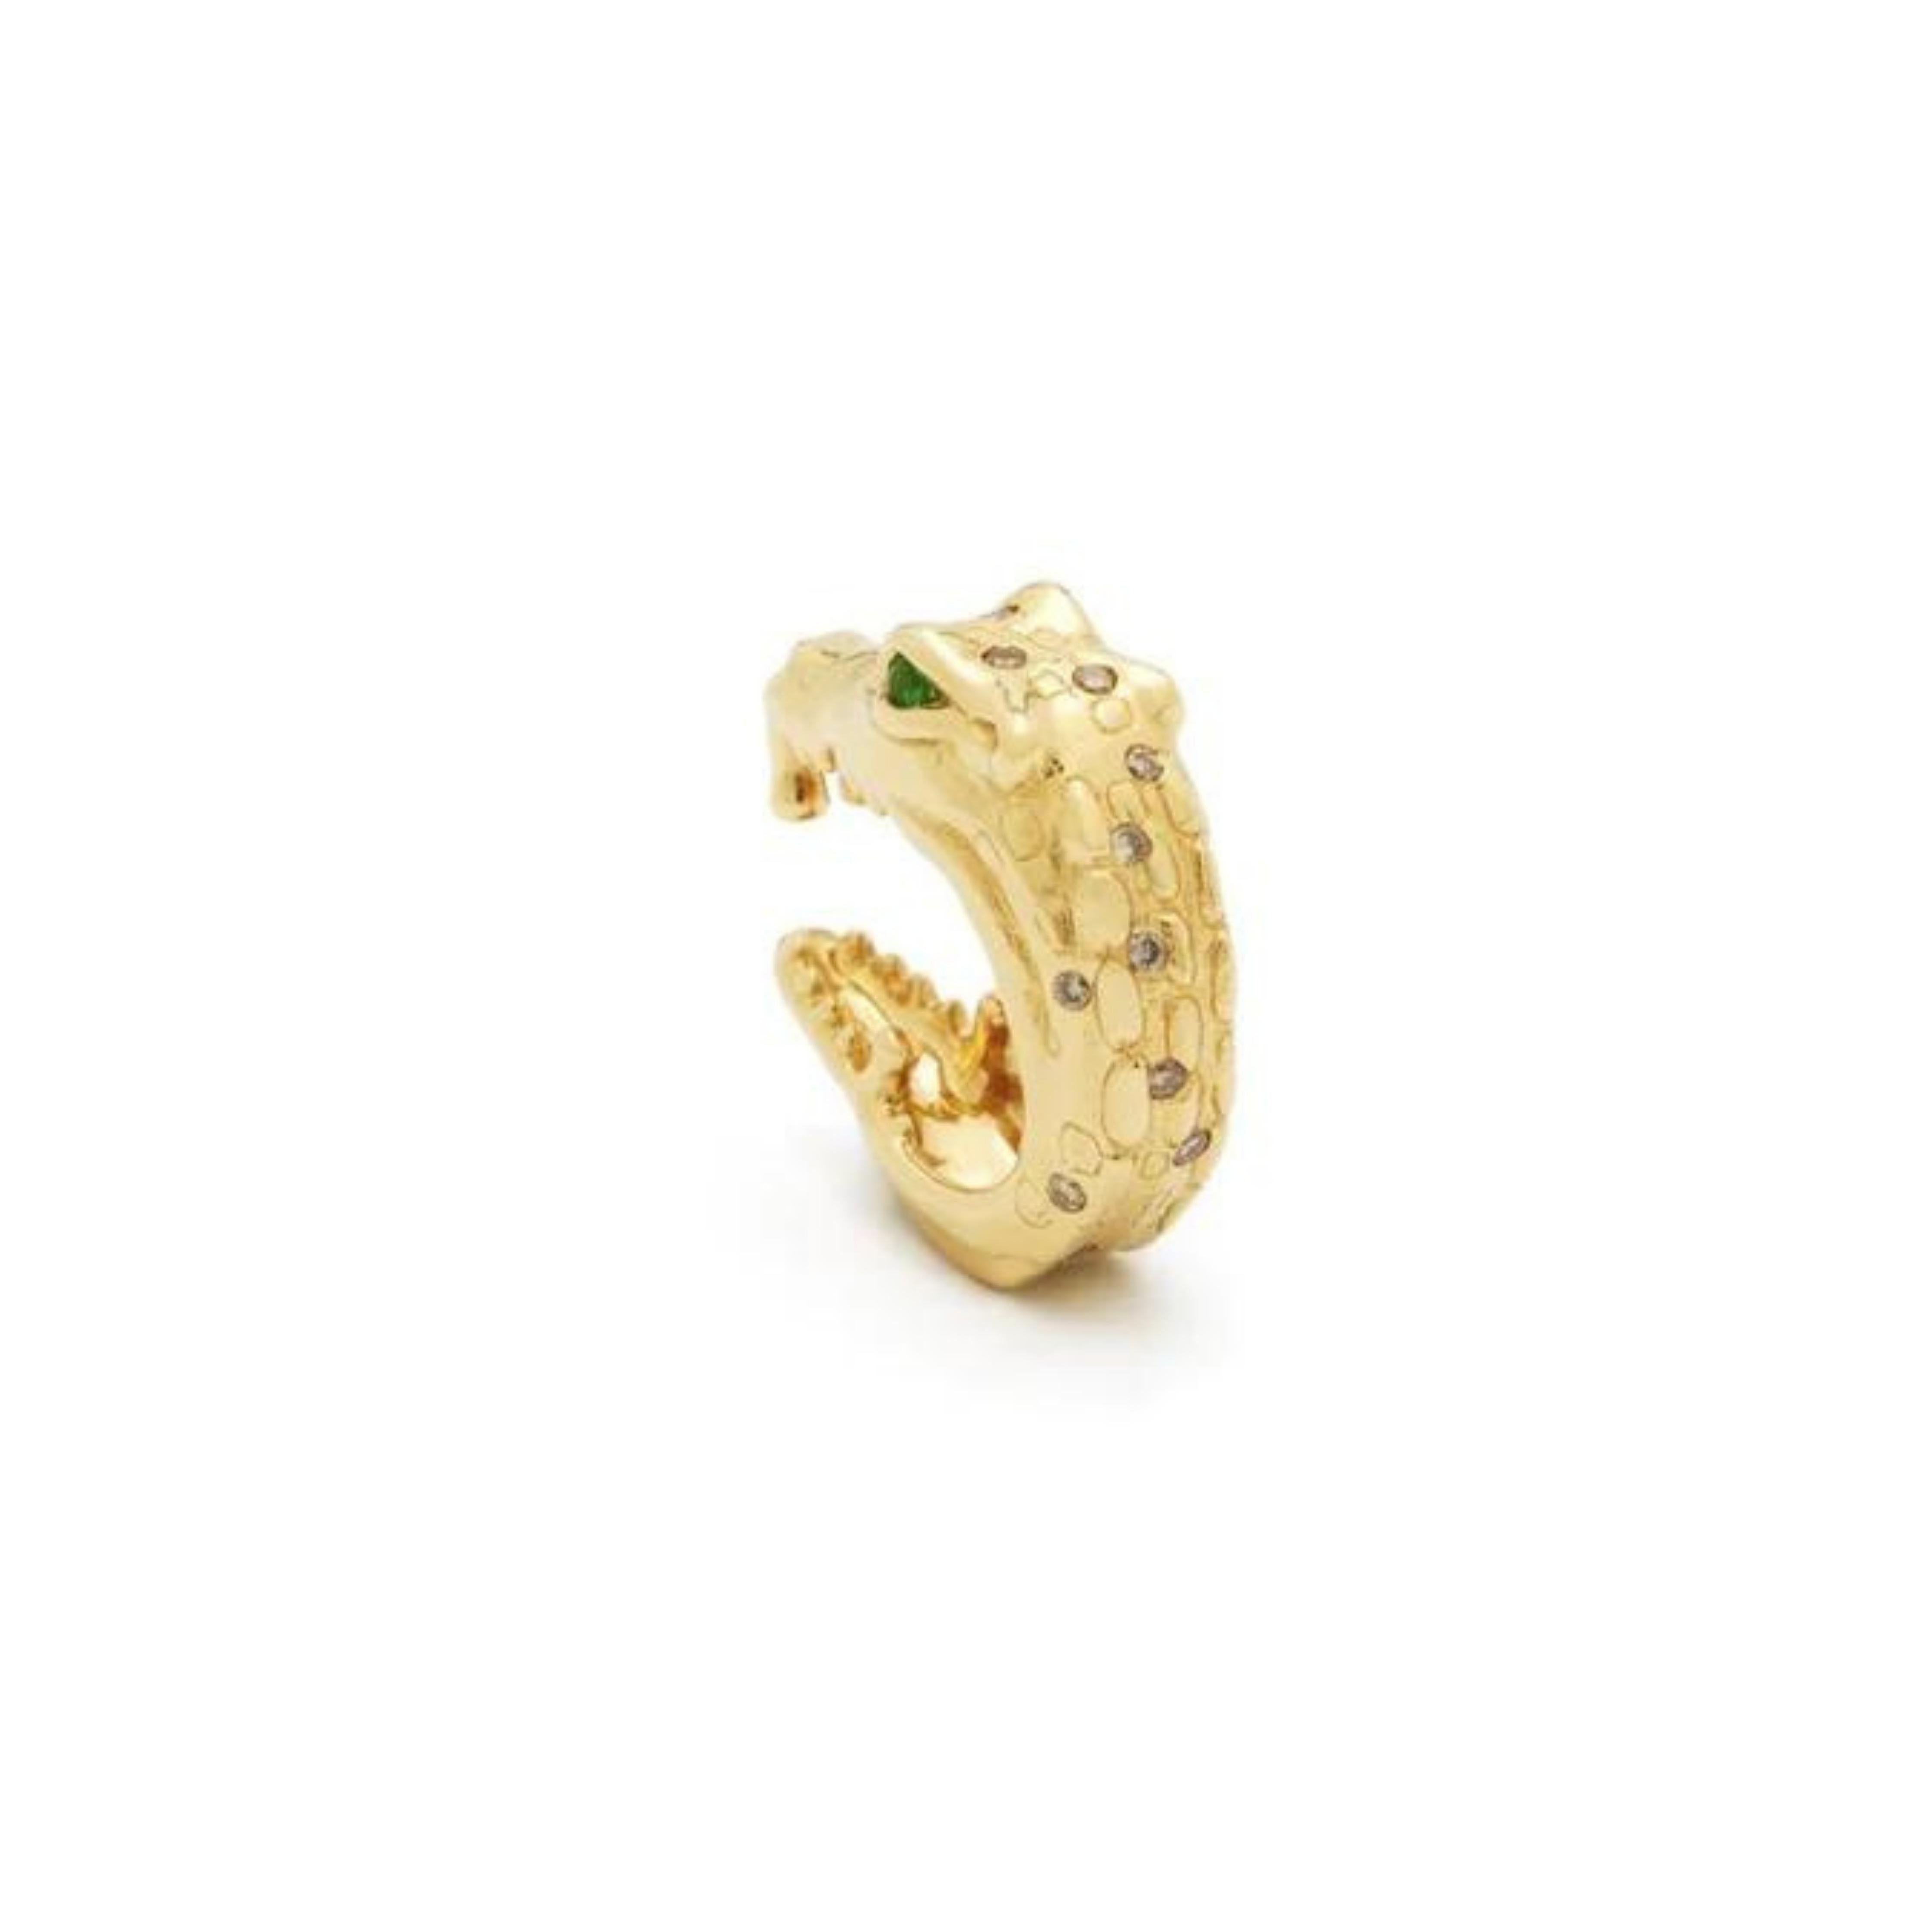 Bibi van der Velden Alligator Bite Earhugger. An ear cuff in the shape of a biting alligator. Made from 18K gold and emerald eyes with diamond accents. Photo shows ear cuff from the back view.